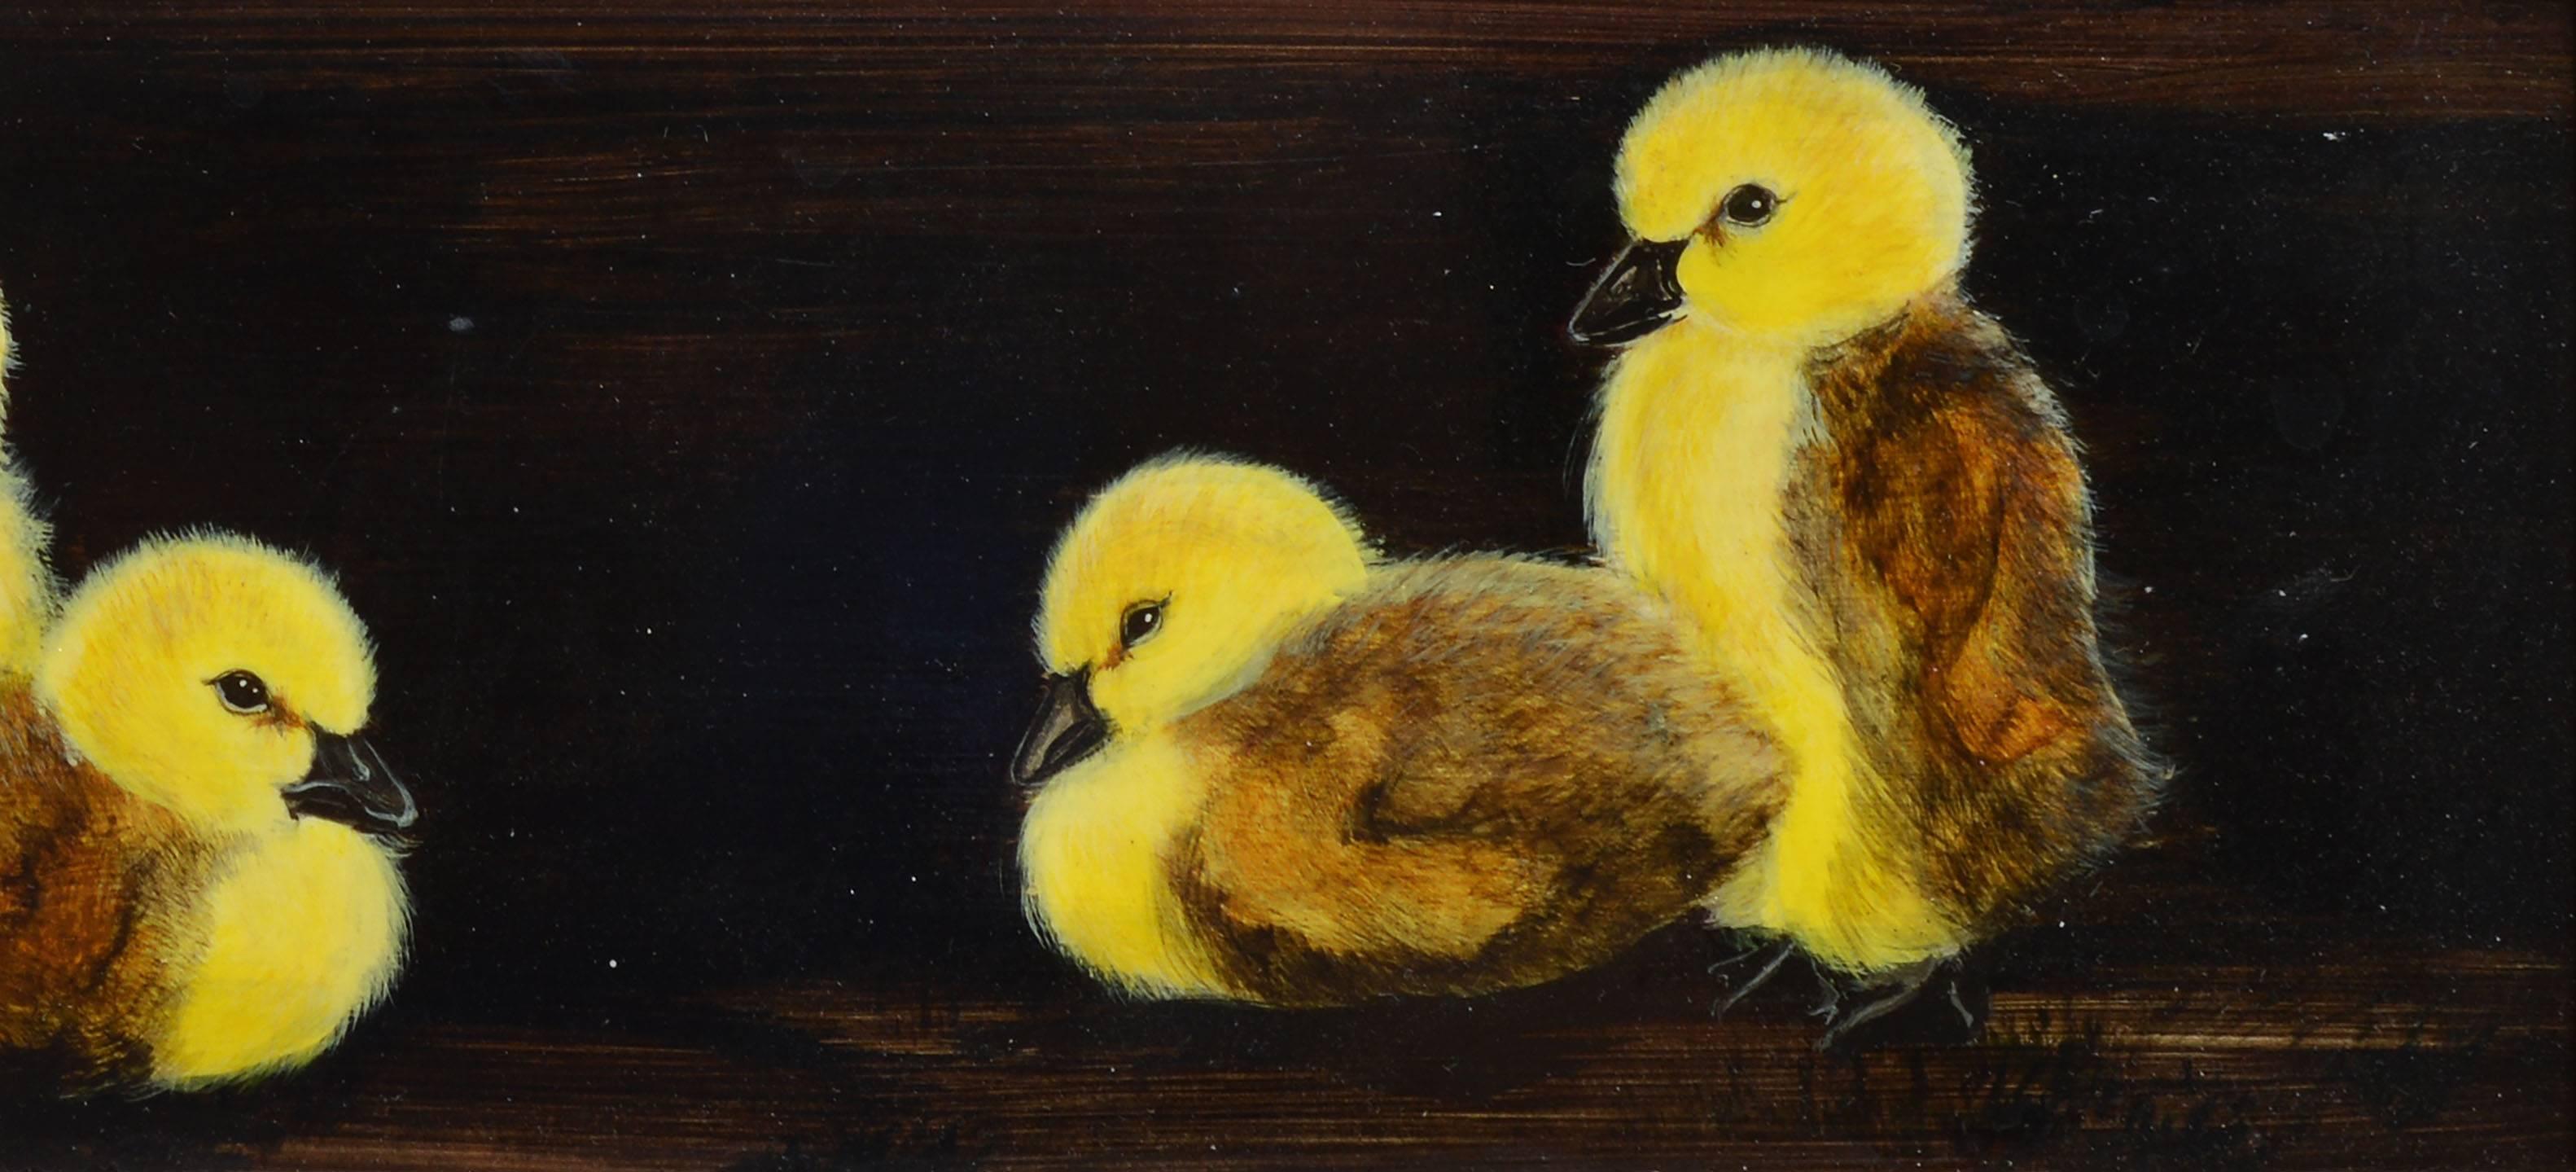 Realist portrait of chicks.  Oil on board, circa 1970.  Signed illegibly lower right.  Displayed in a giltwood frame.  Image size, 9.25"L x 3.25"H, overall 13"L x 6.5"H. 